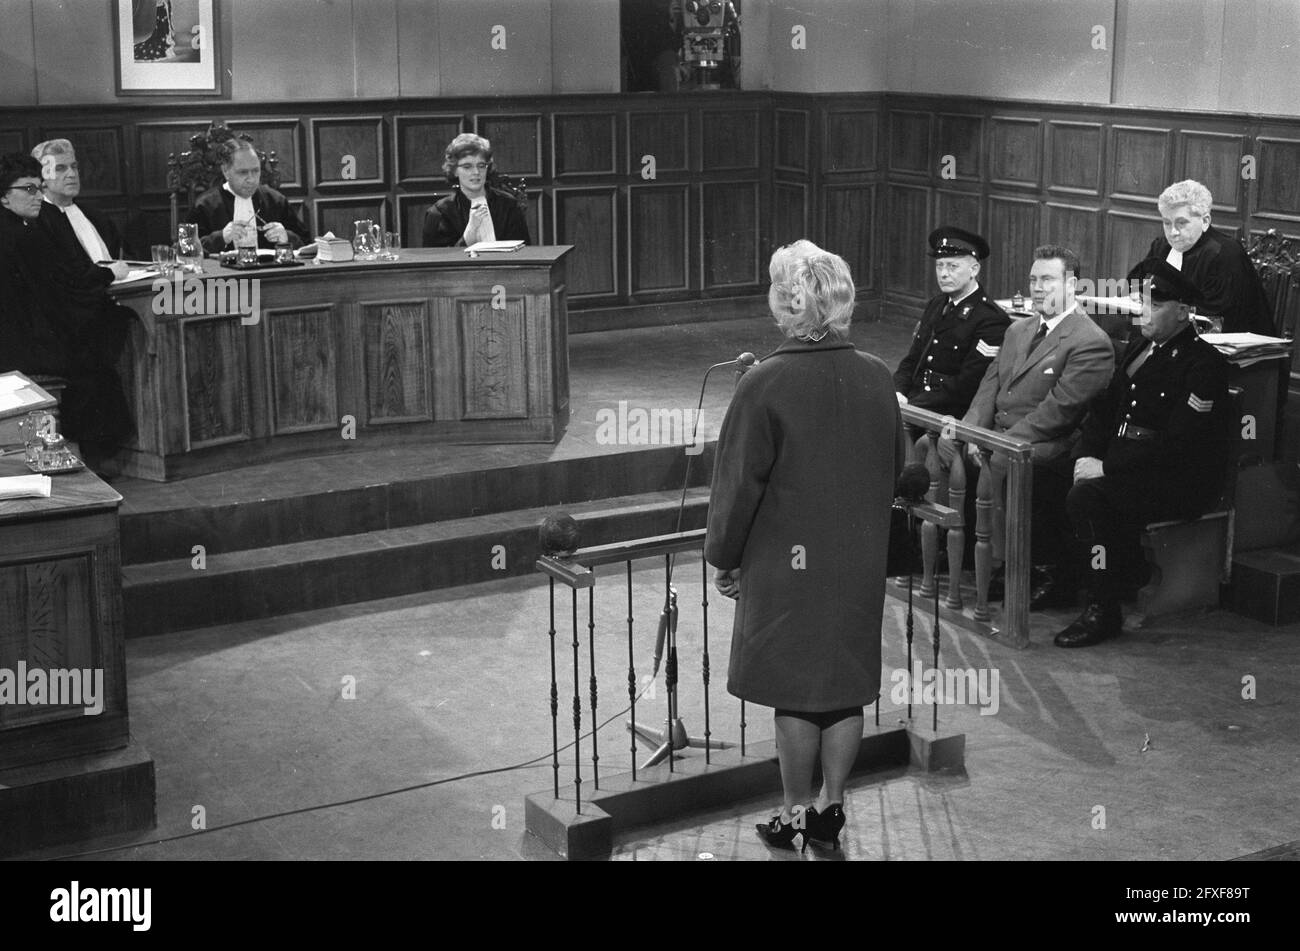 TV court the Case of Veen, in front of witness stand Dini Klaassen-Huisstede, from left to right the judges mr. Roels prof. Belinfante, mej. mr. Van Dijk, Arie van Veen, February 18, 1963, RECHTERS, courts, The Netherlands, 20th century press agency photo, news to remember, documentary, historic photography 1945-1990, visual stories, human history of the Twentieth Century, capturing moments in time Stock Photo